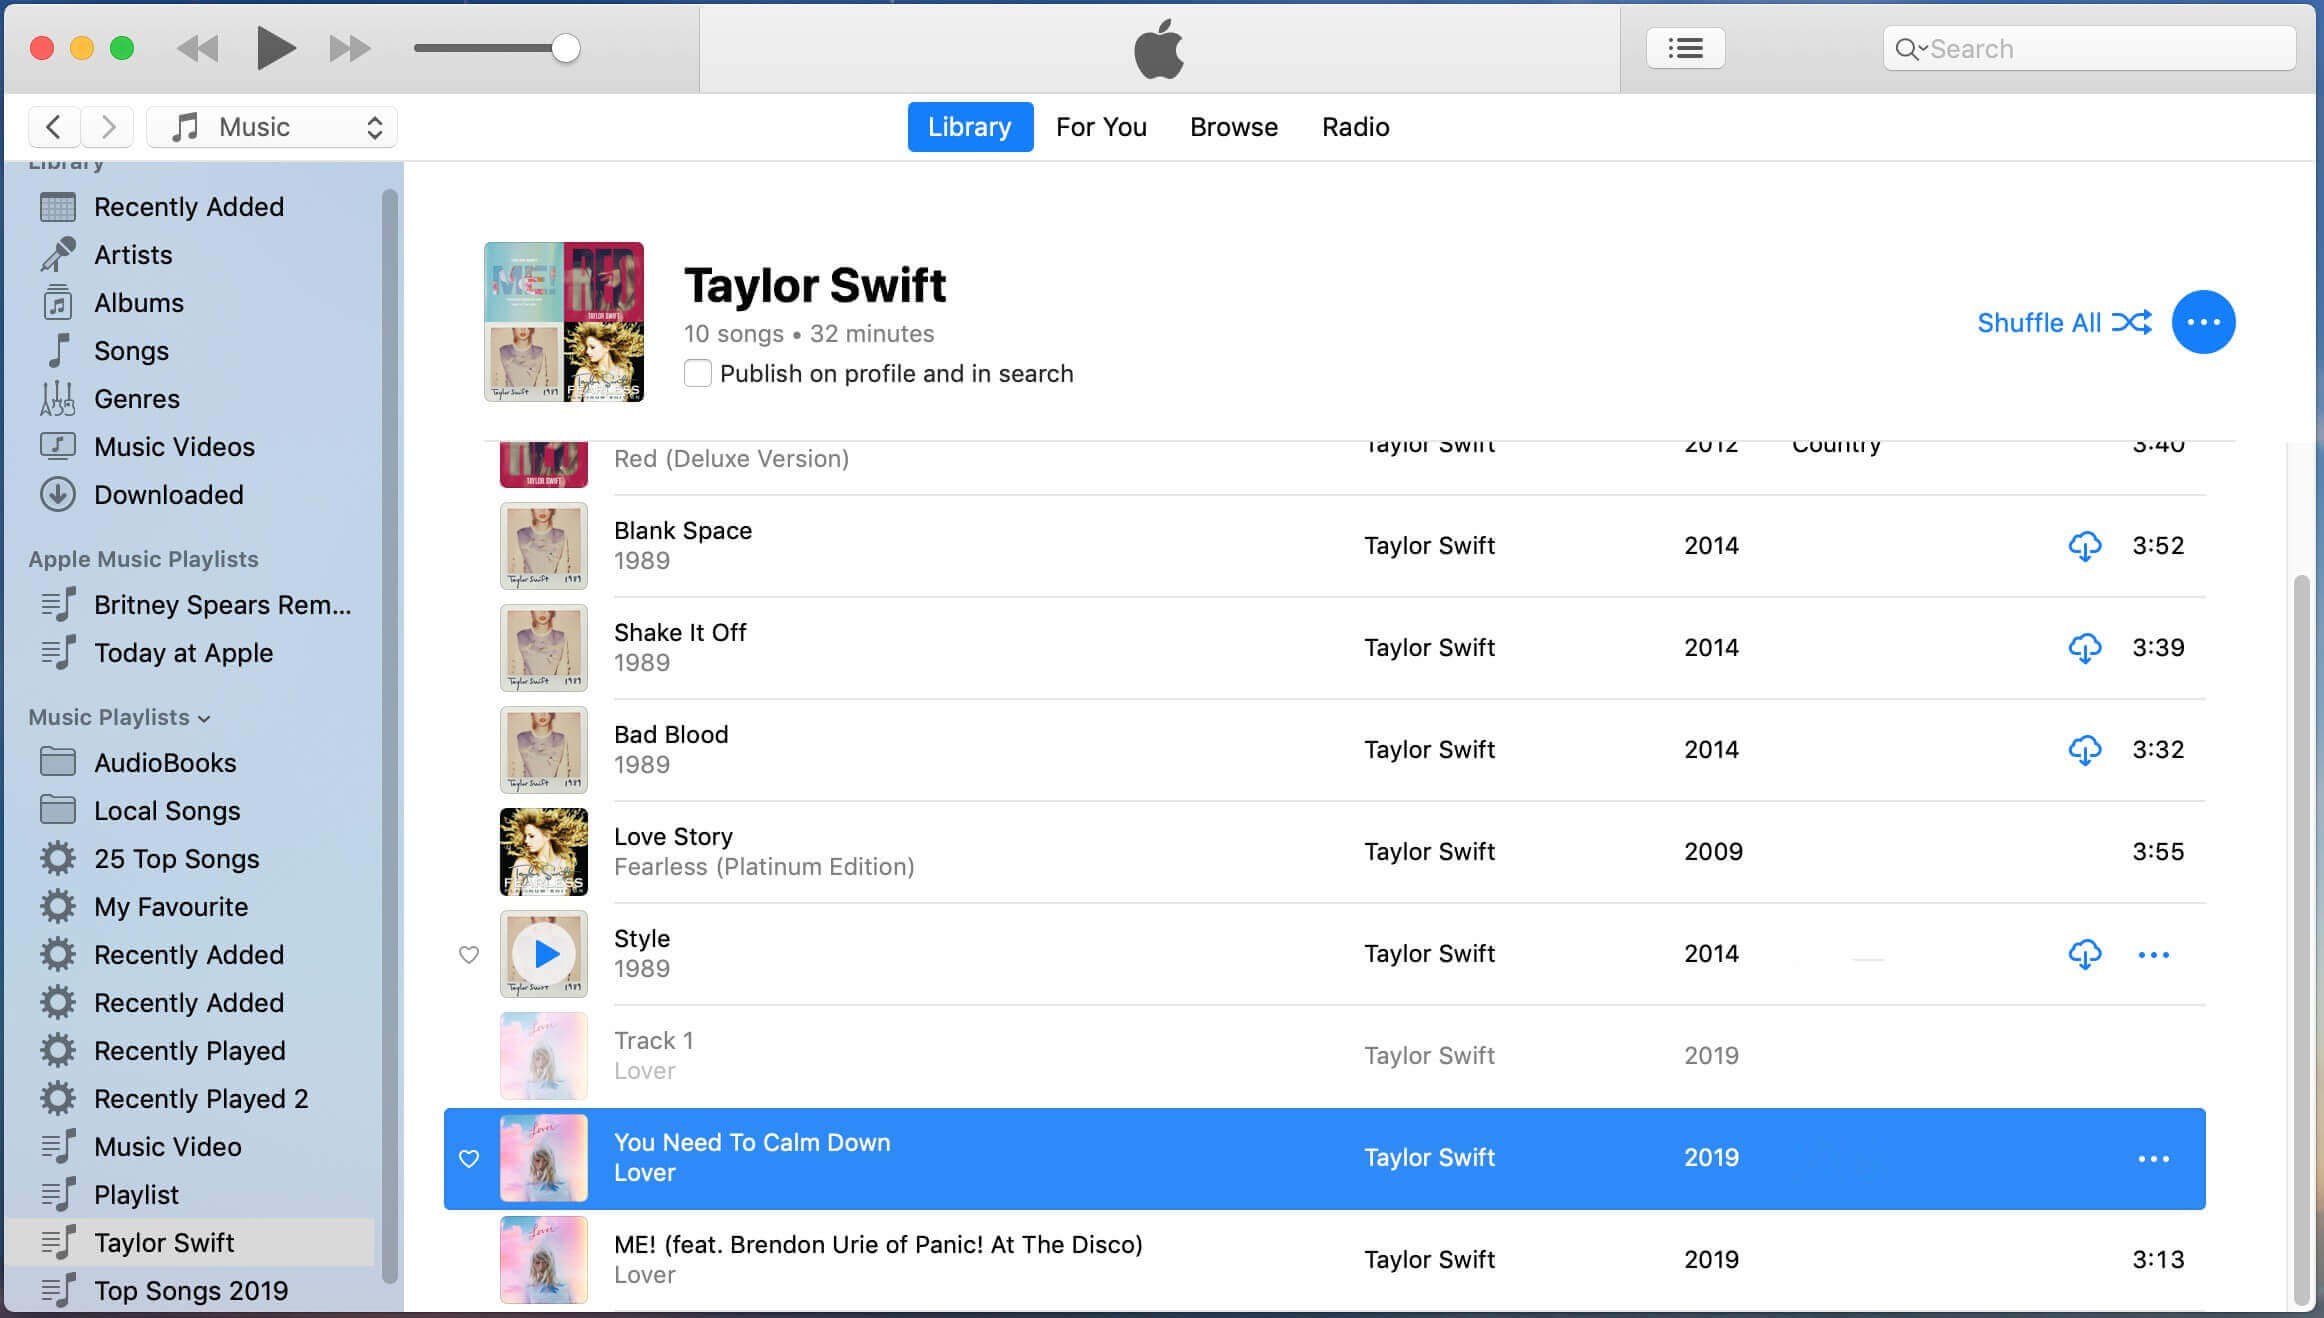 You Need To Calm Down Taylor Swift Mp3 Download From Apple Music